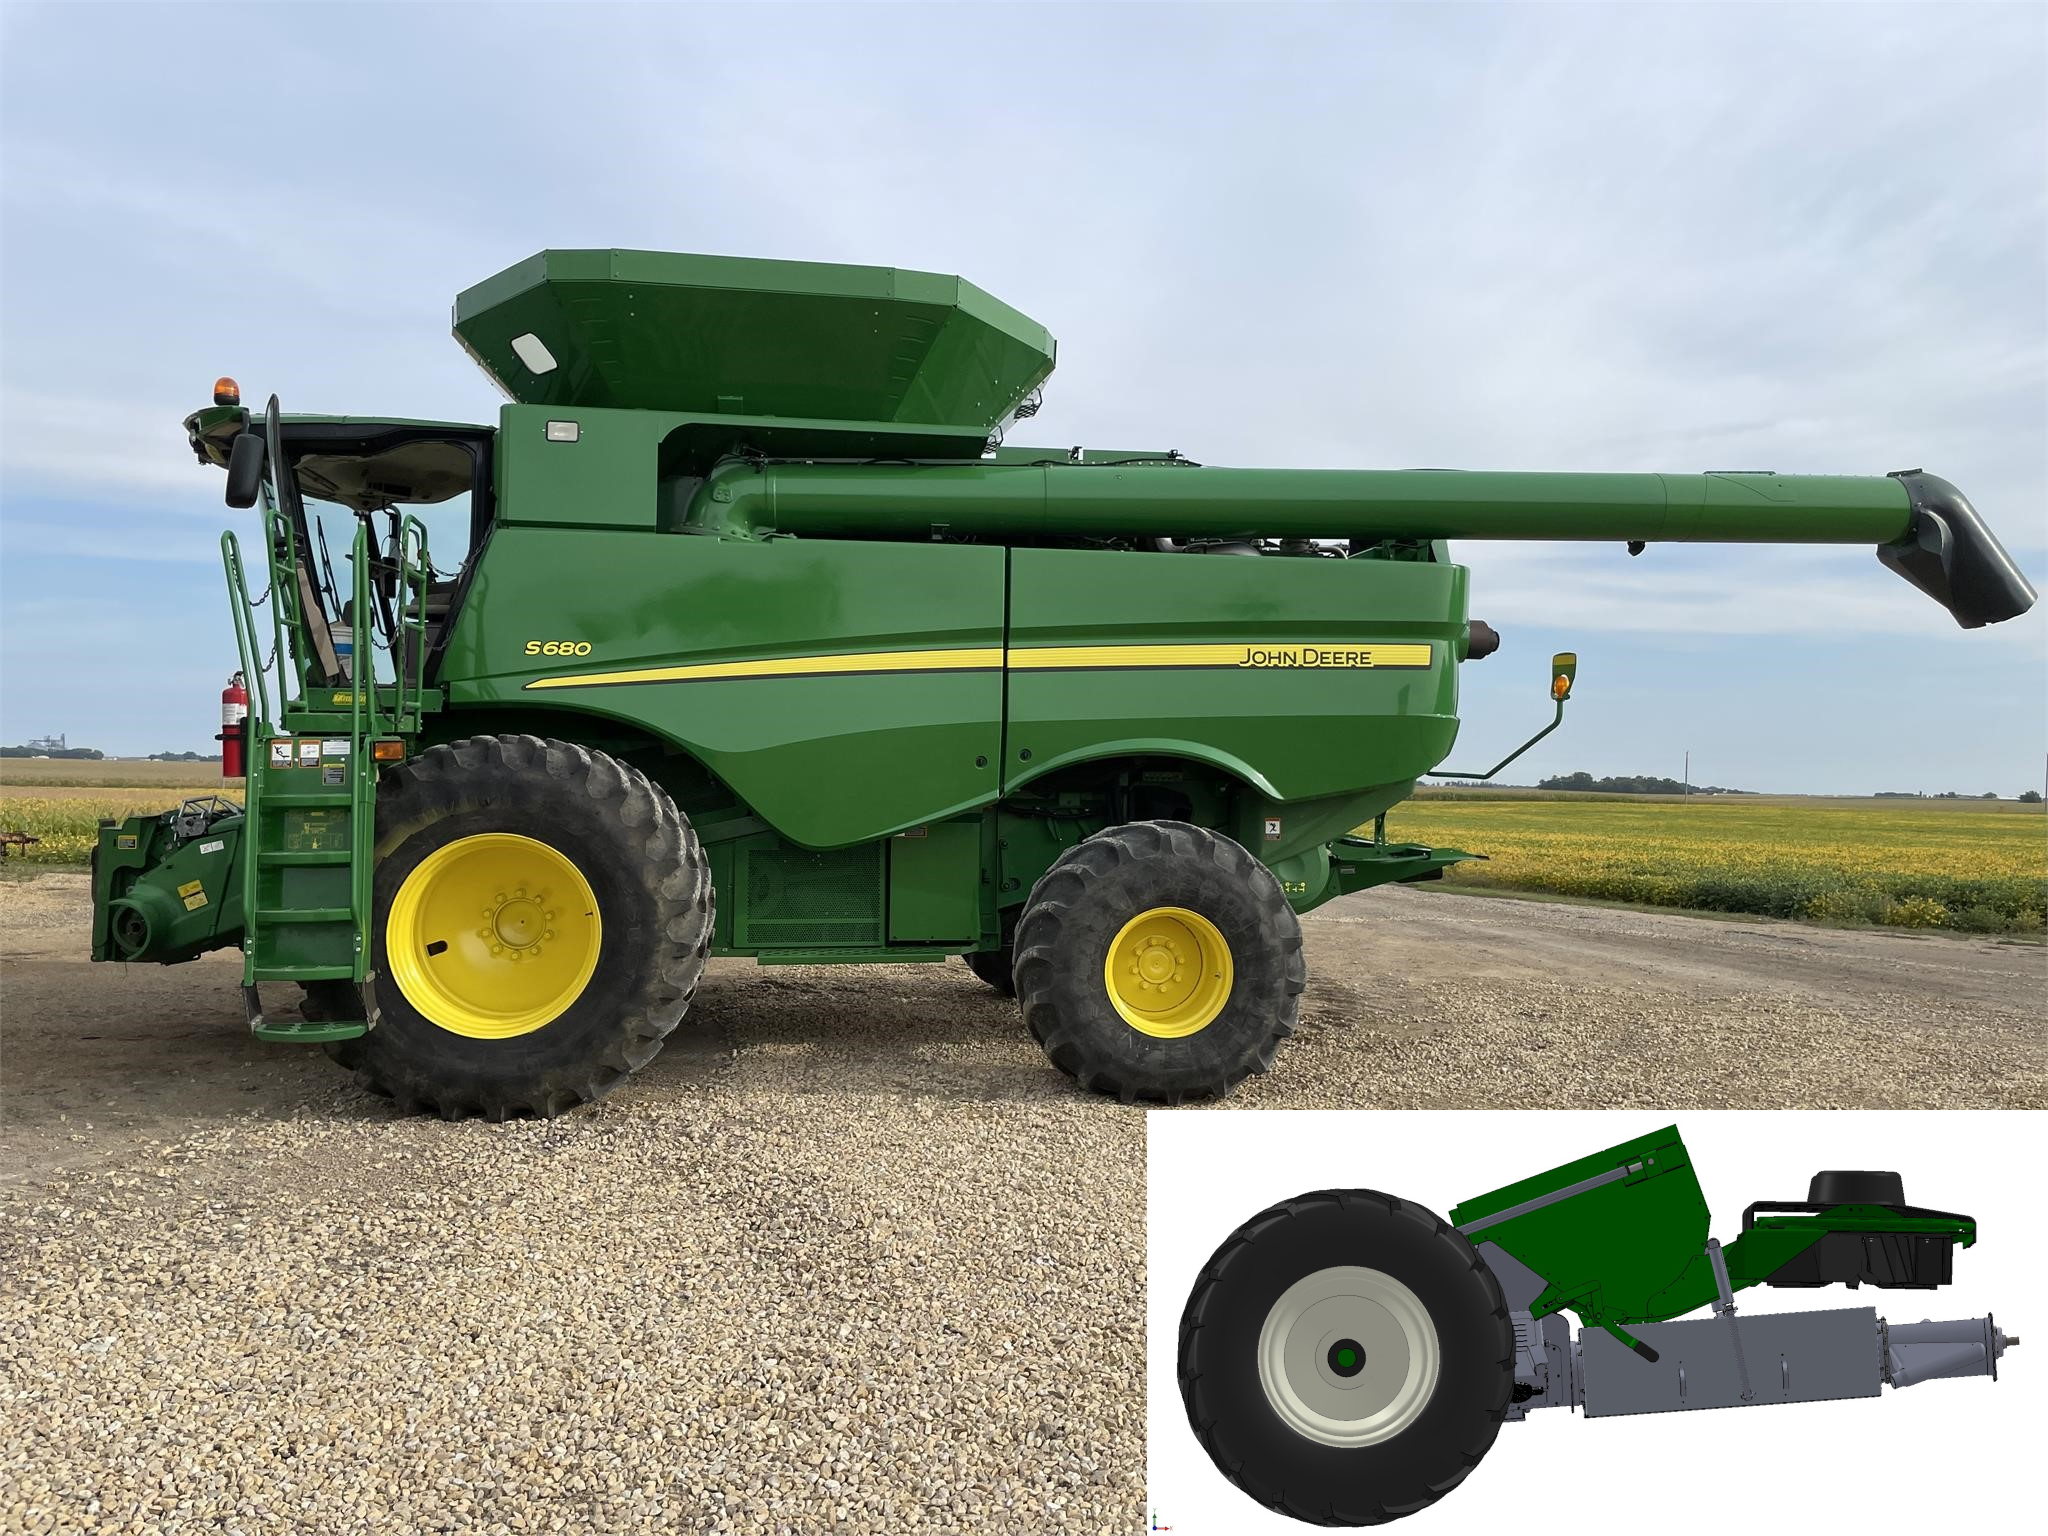 John Deere harvester painted green and yellow with an inset showing where the Weed Seed Destroyer would sit.